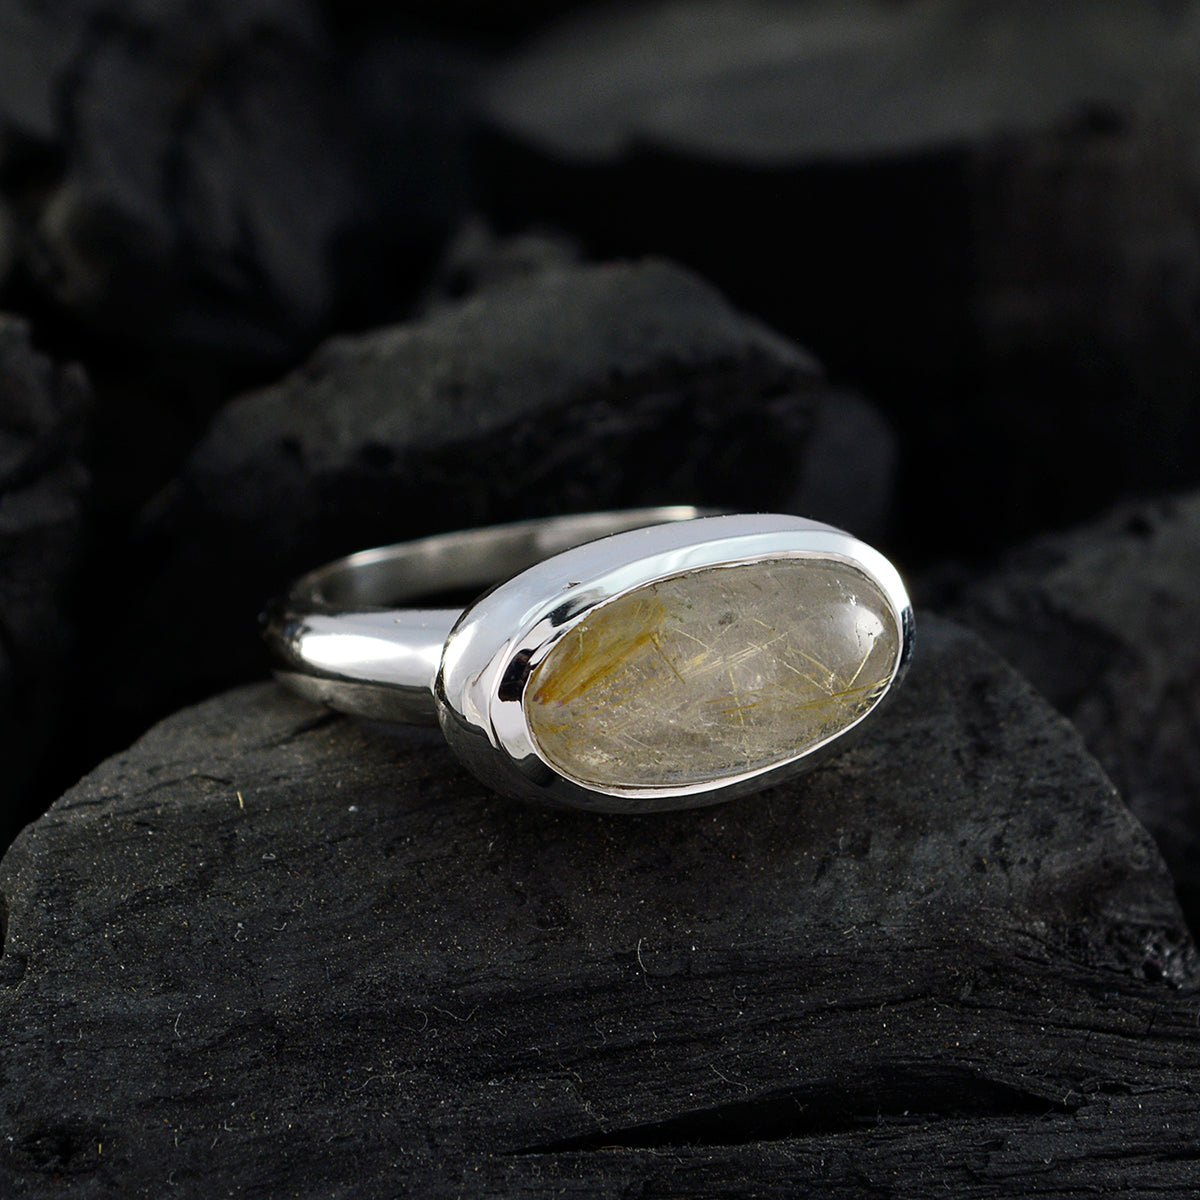 Magnificent Gem Rutile Quartz Sterling Silver Ring Jewelry Definition